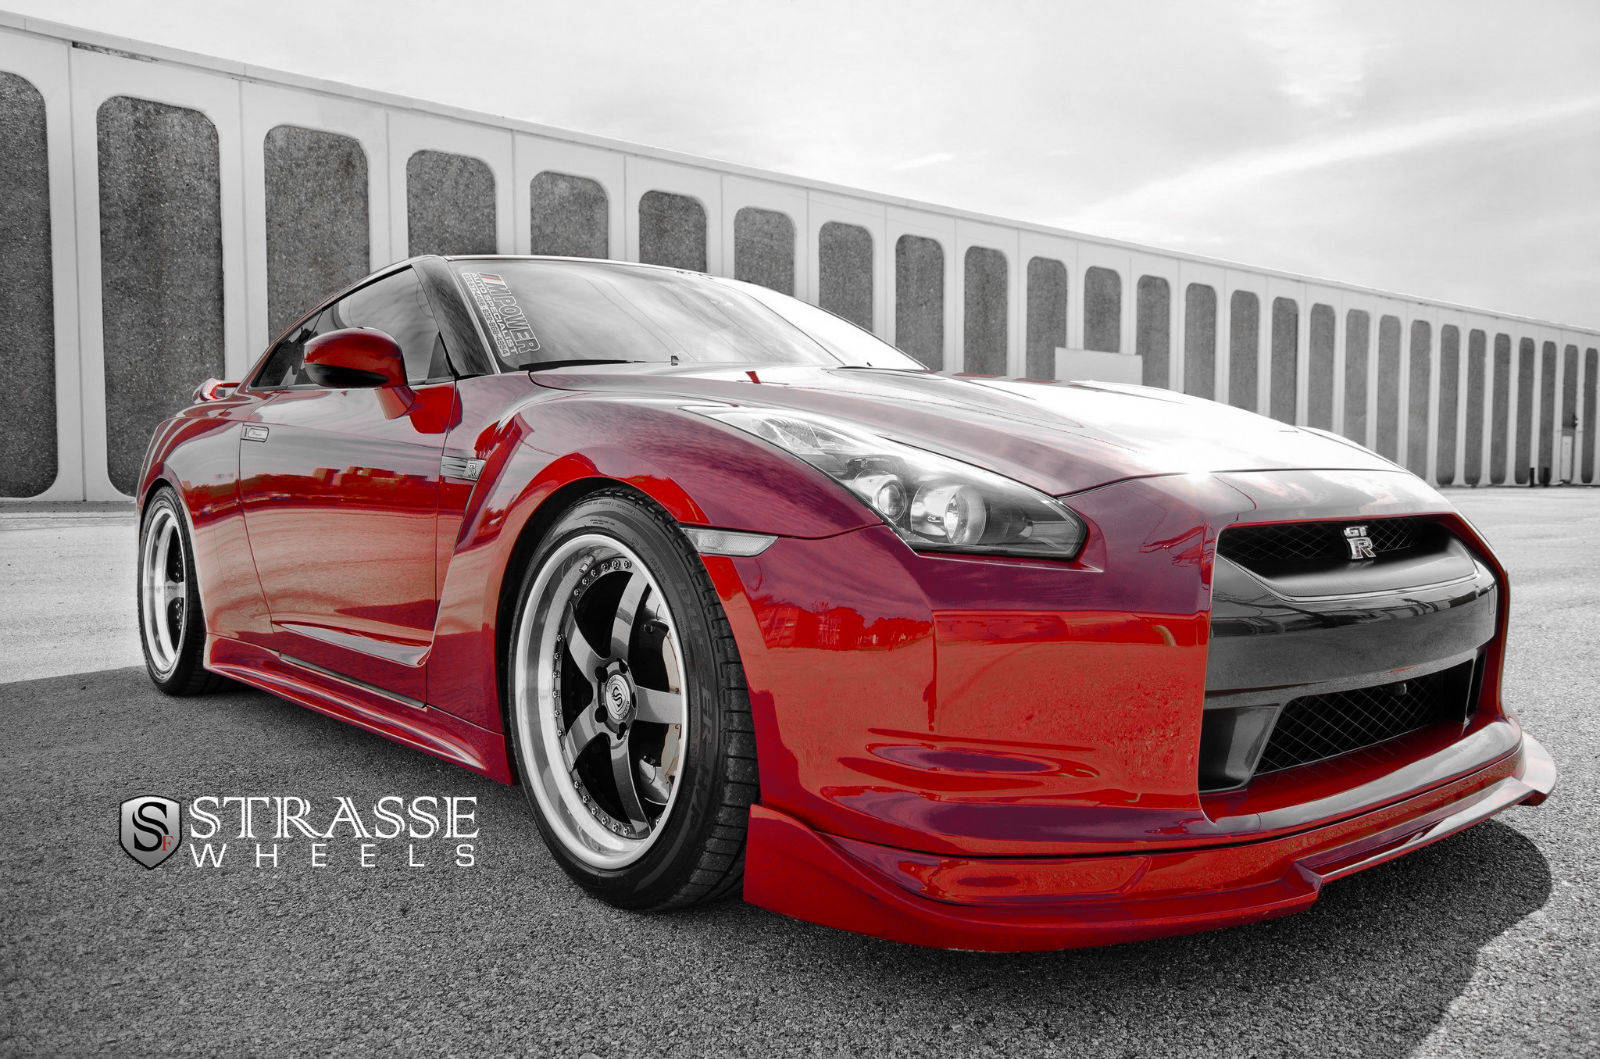 Caption: Immaculate Nissan Skyline GT-R R35 in Stunning Red Wallpaper